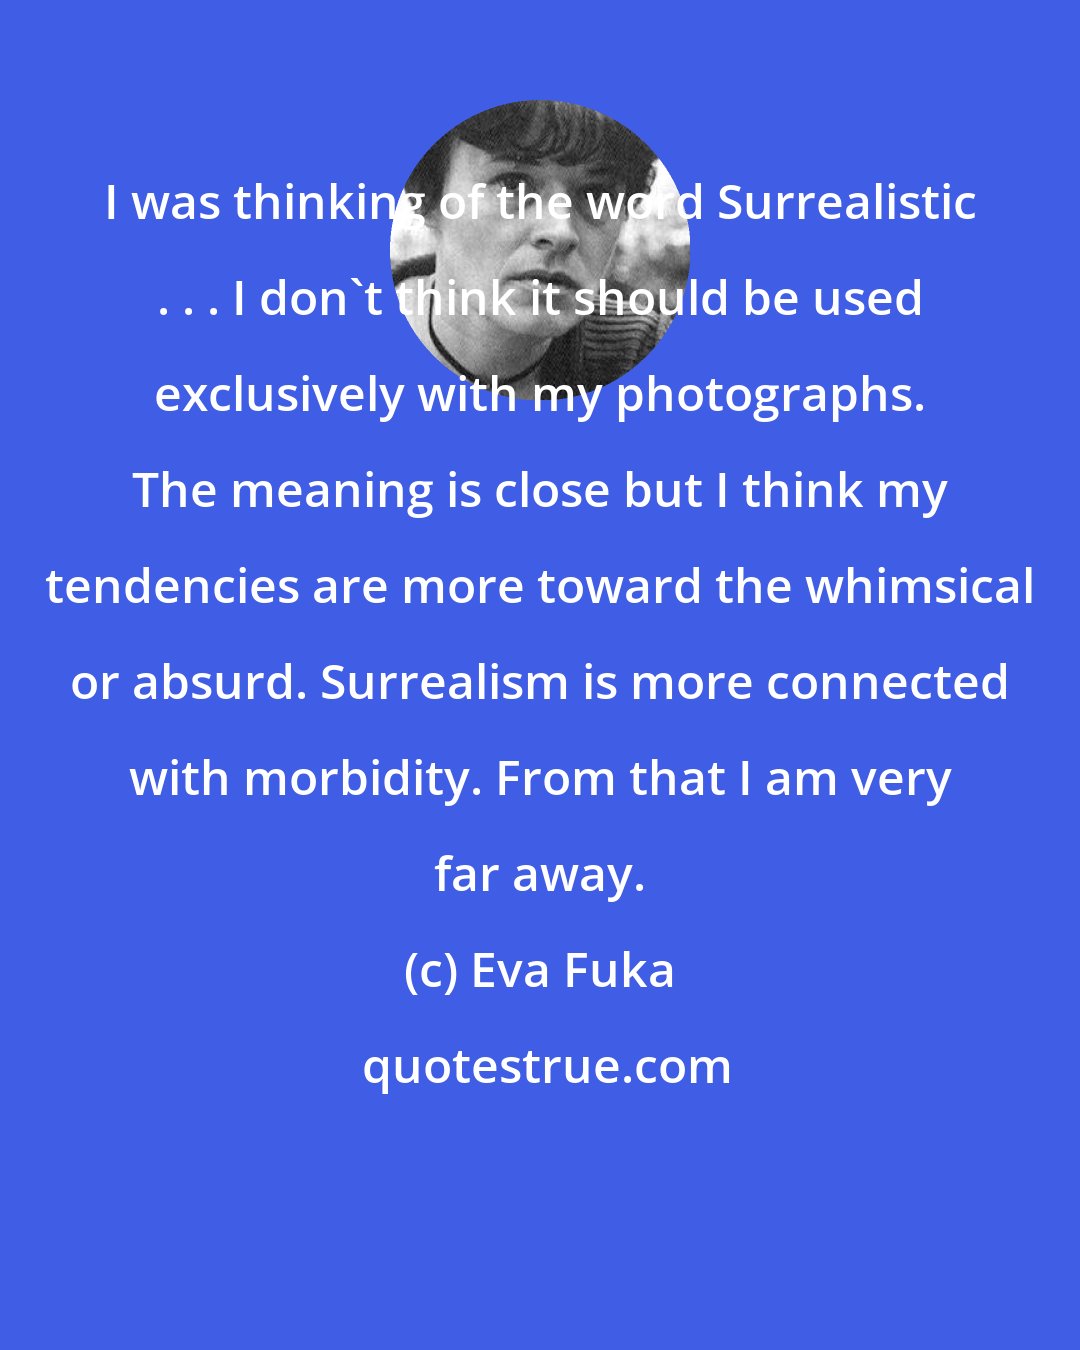 Eva Fuka: I was thinking of the word Surrealistic . . . I don't think it should be used exclusively with my photographs. The meaning is close but I think my tendencies are more toward the whimsical or absurd. Surrealism is more connected with morbidity. From that I am very far away.